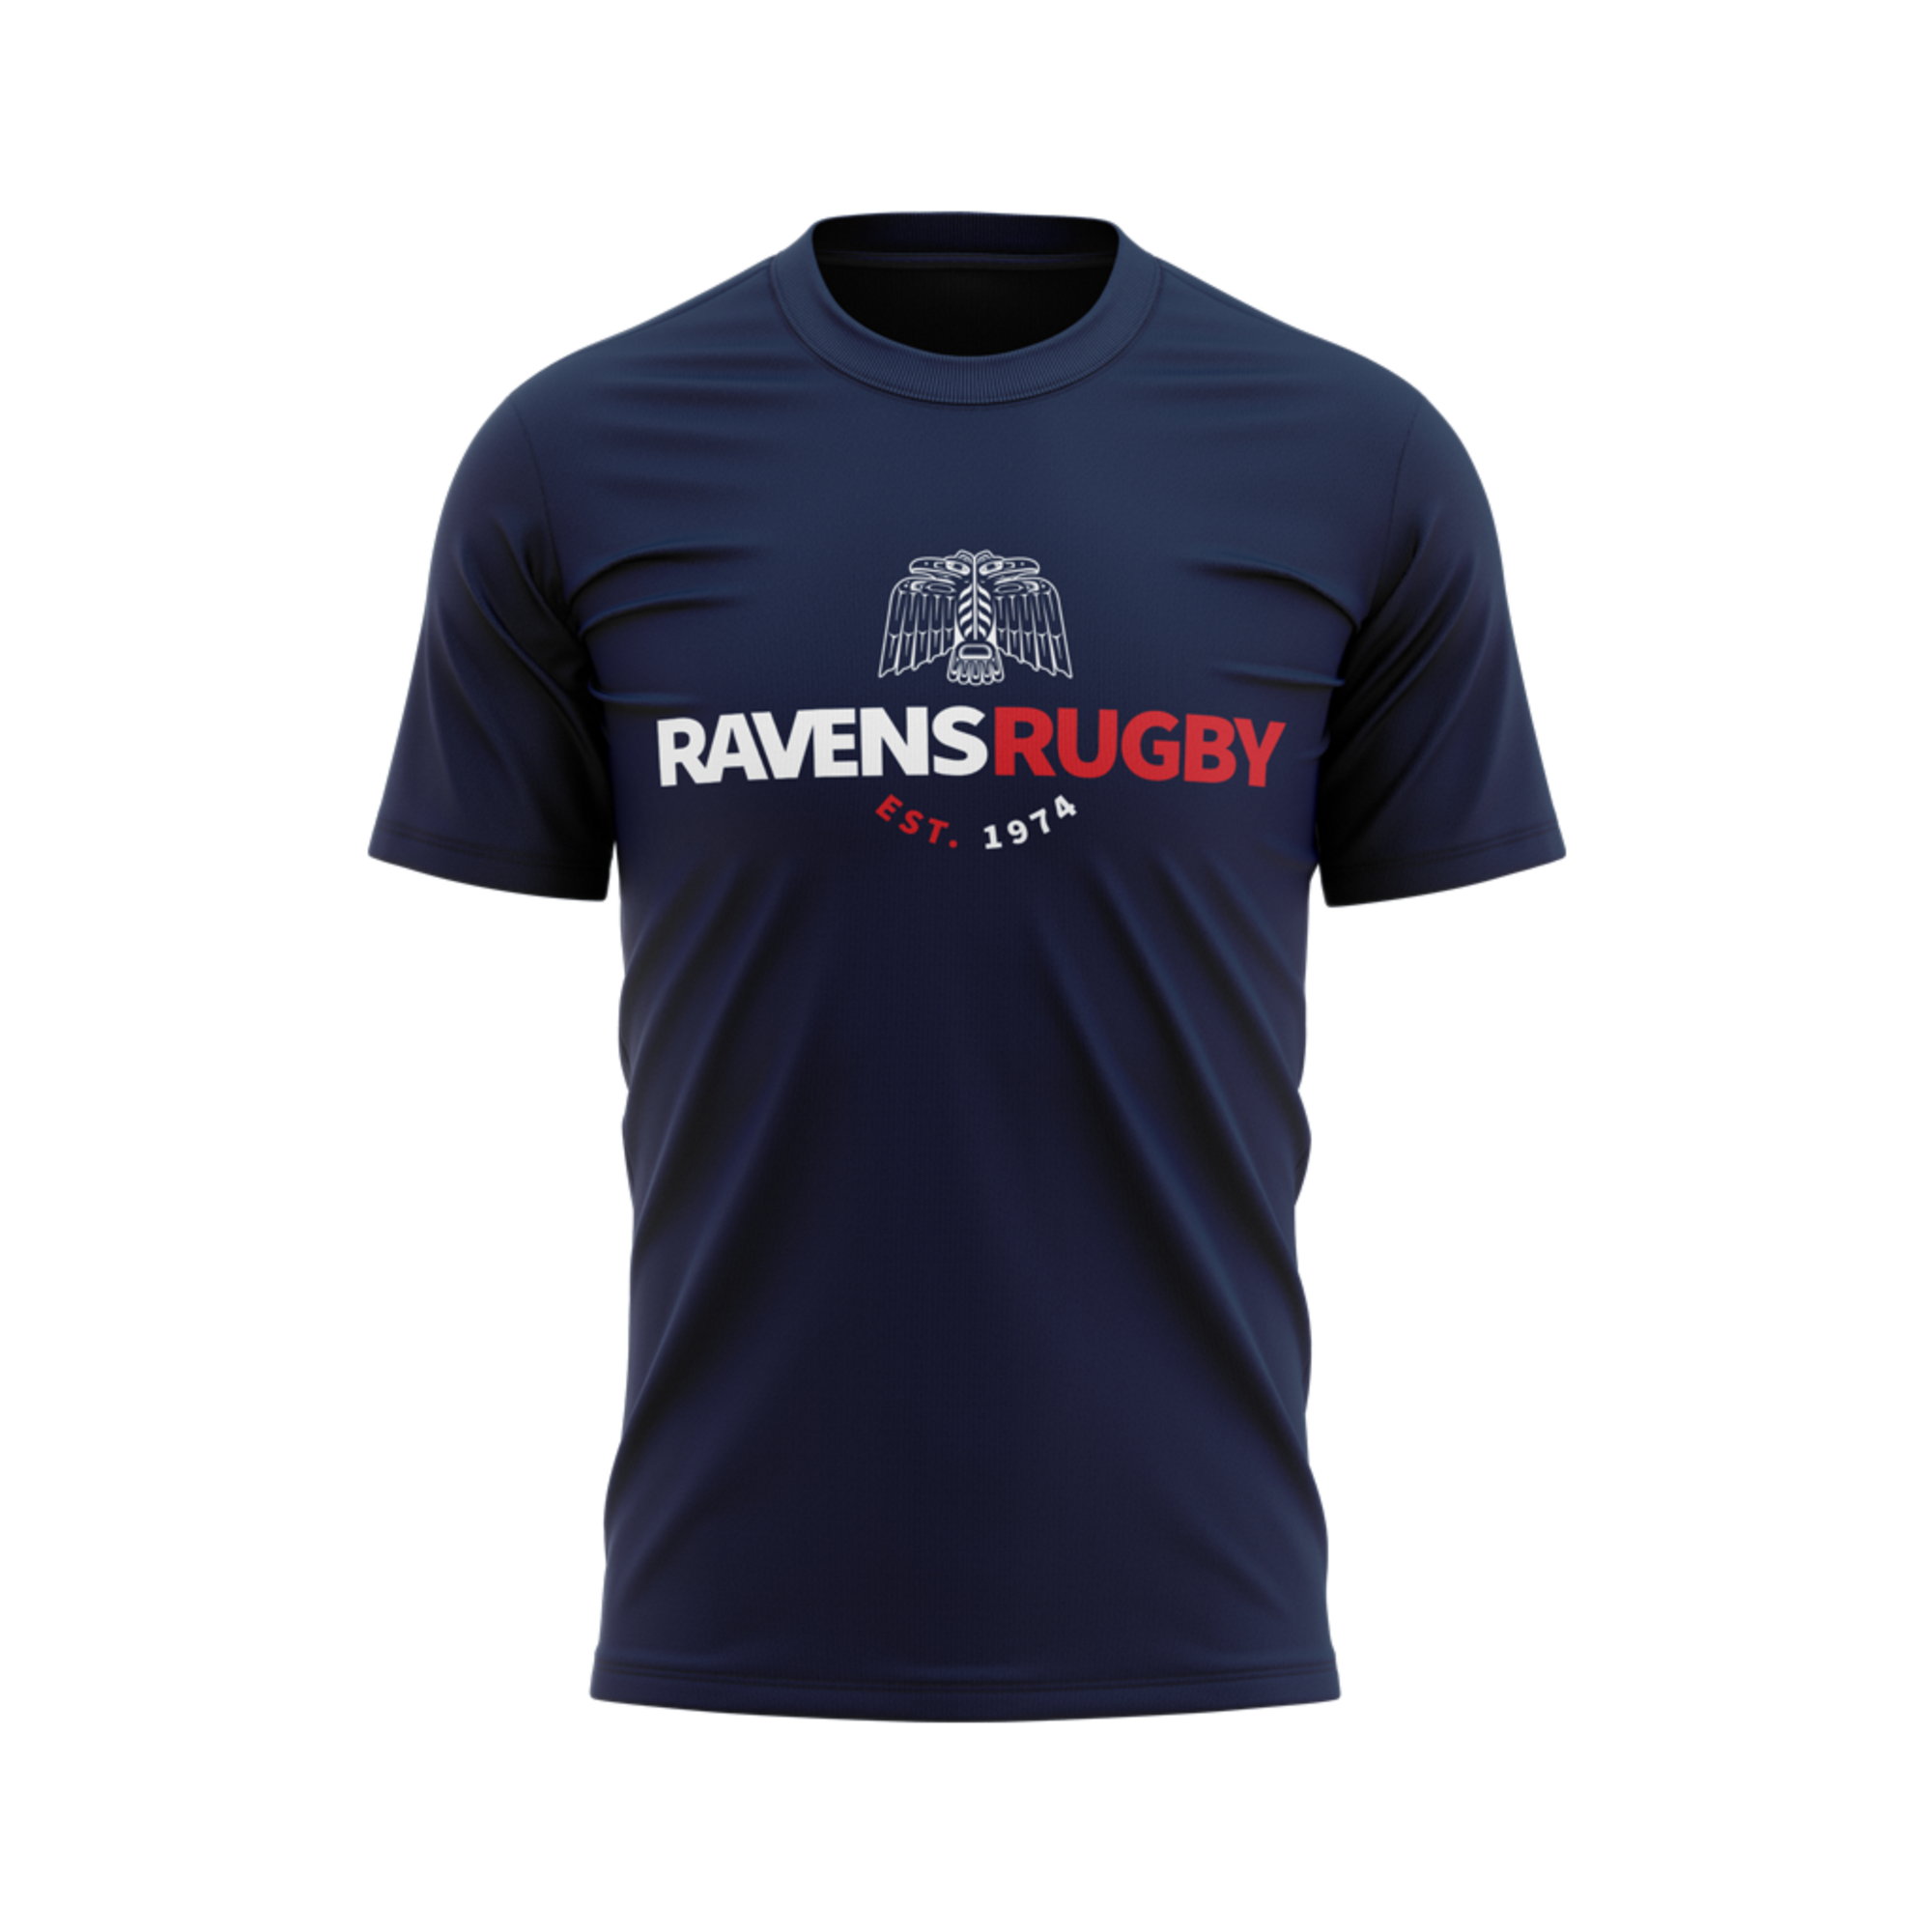 UBCOB Ravens 50th Year Anniversary Performance Polo - Adult Unisex Sizing XS-4XL - Navy/White/Red